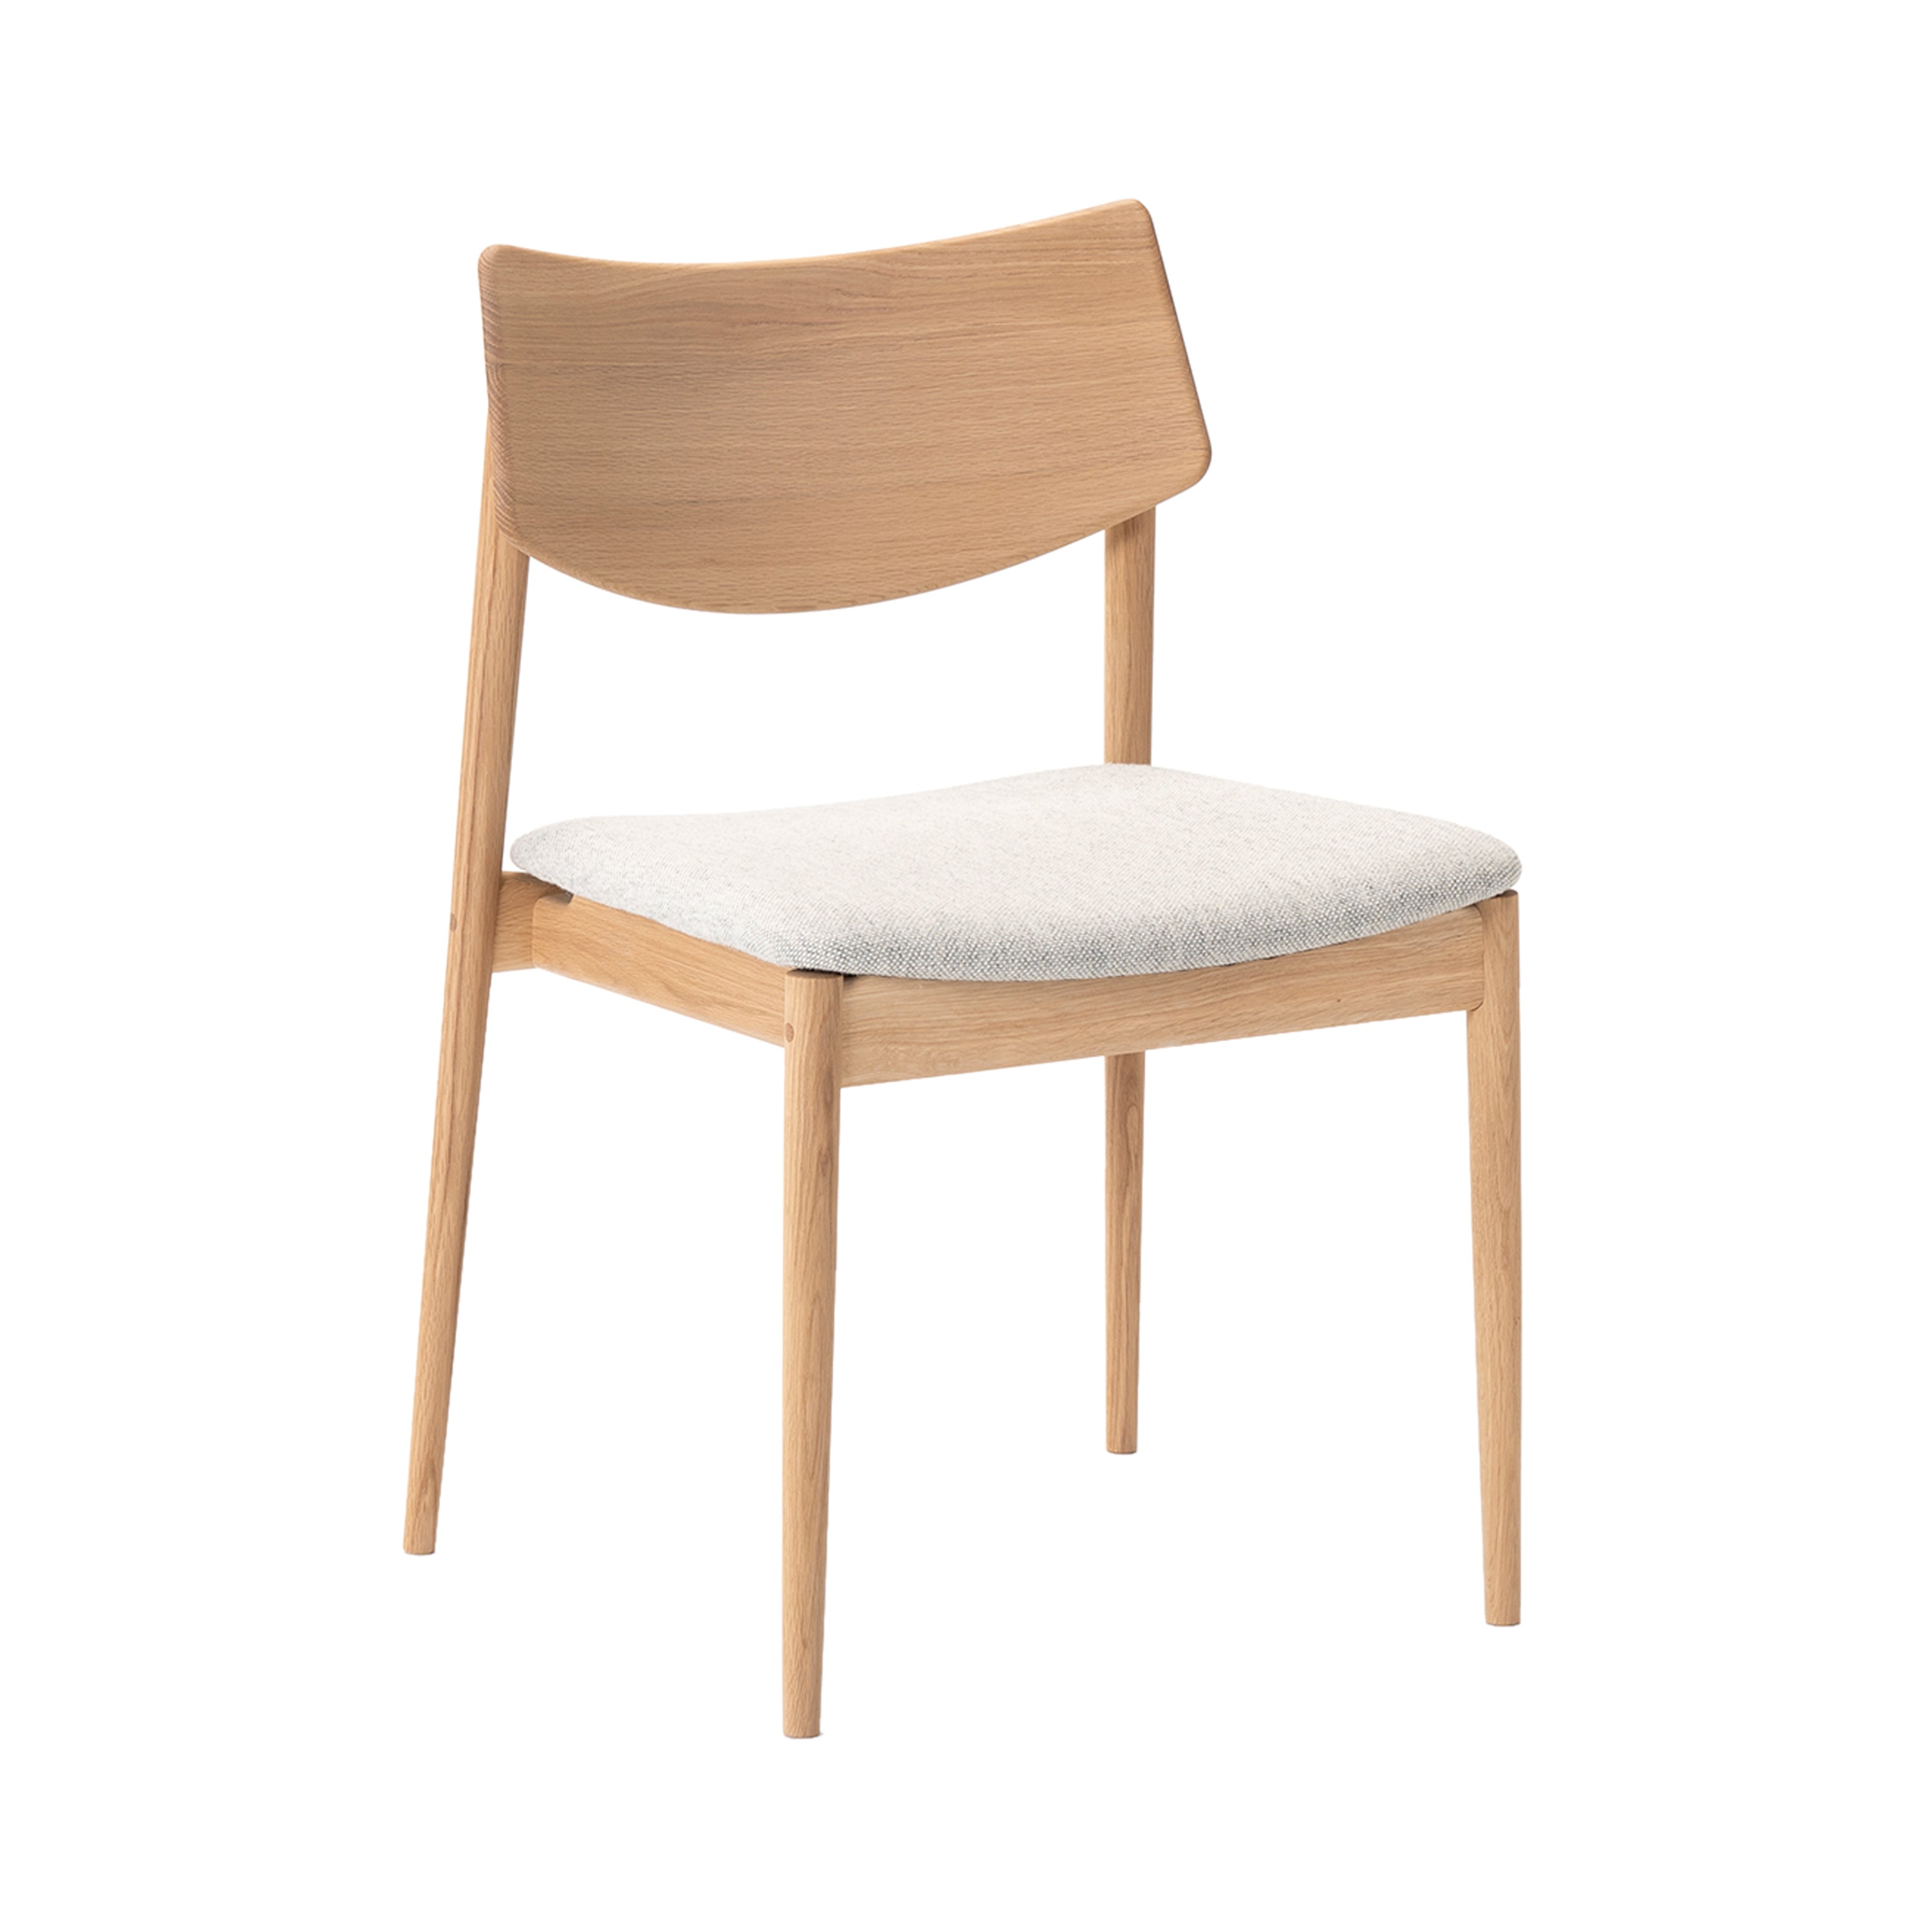 A-DC03 Dining Chair: Pure Oak